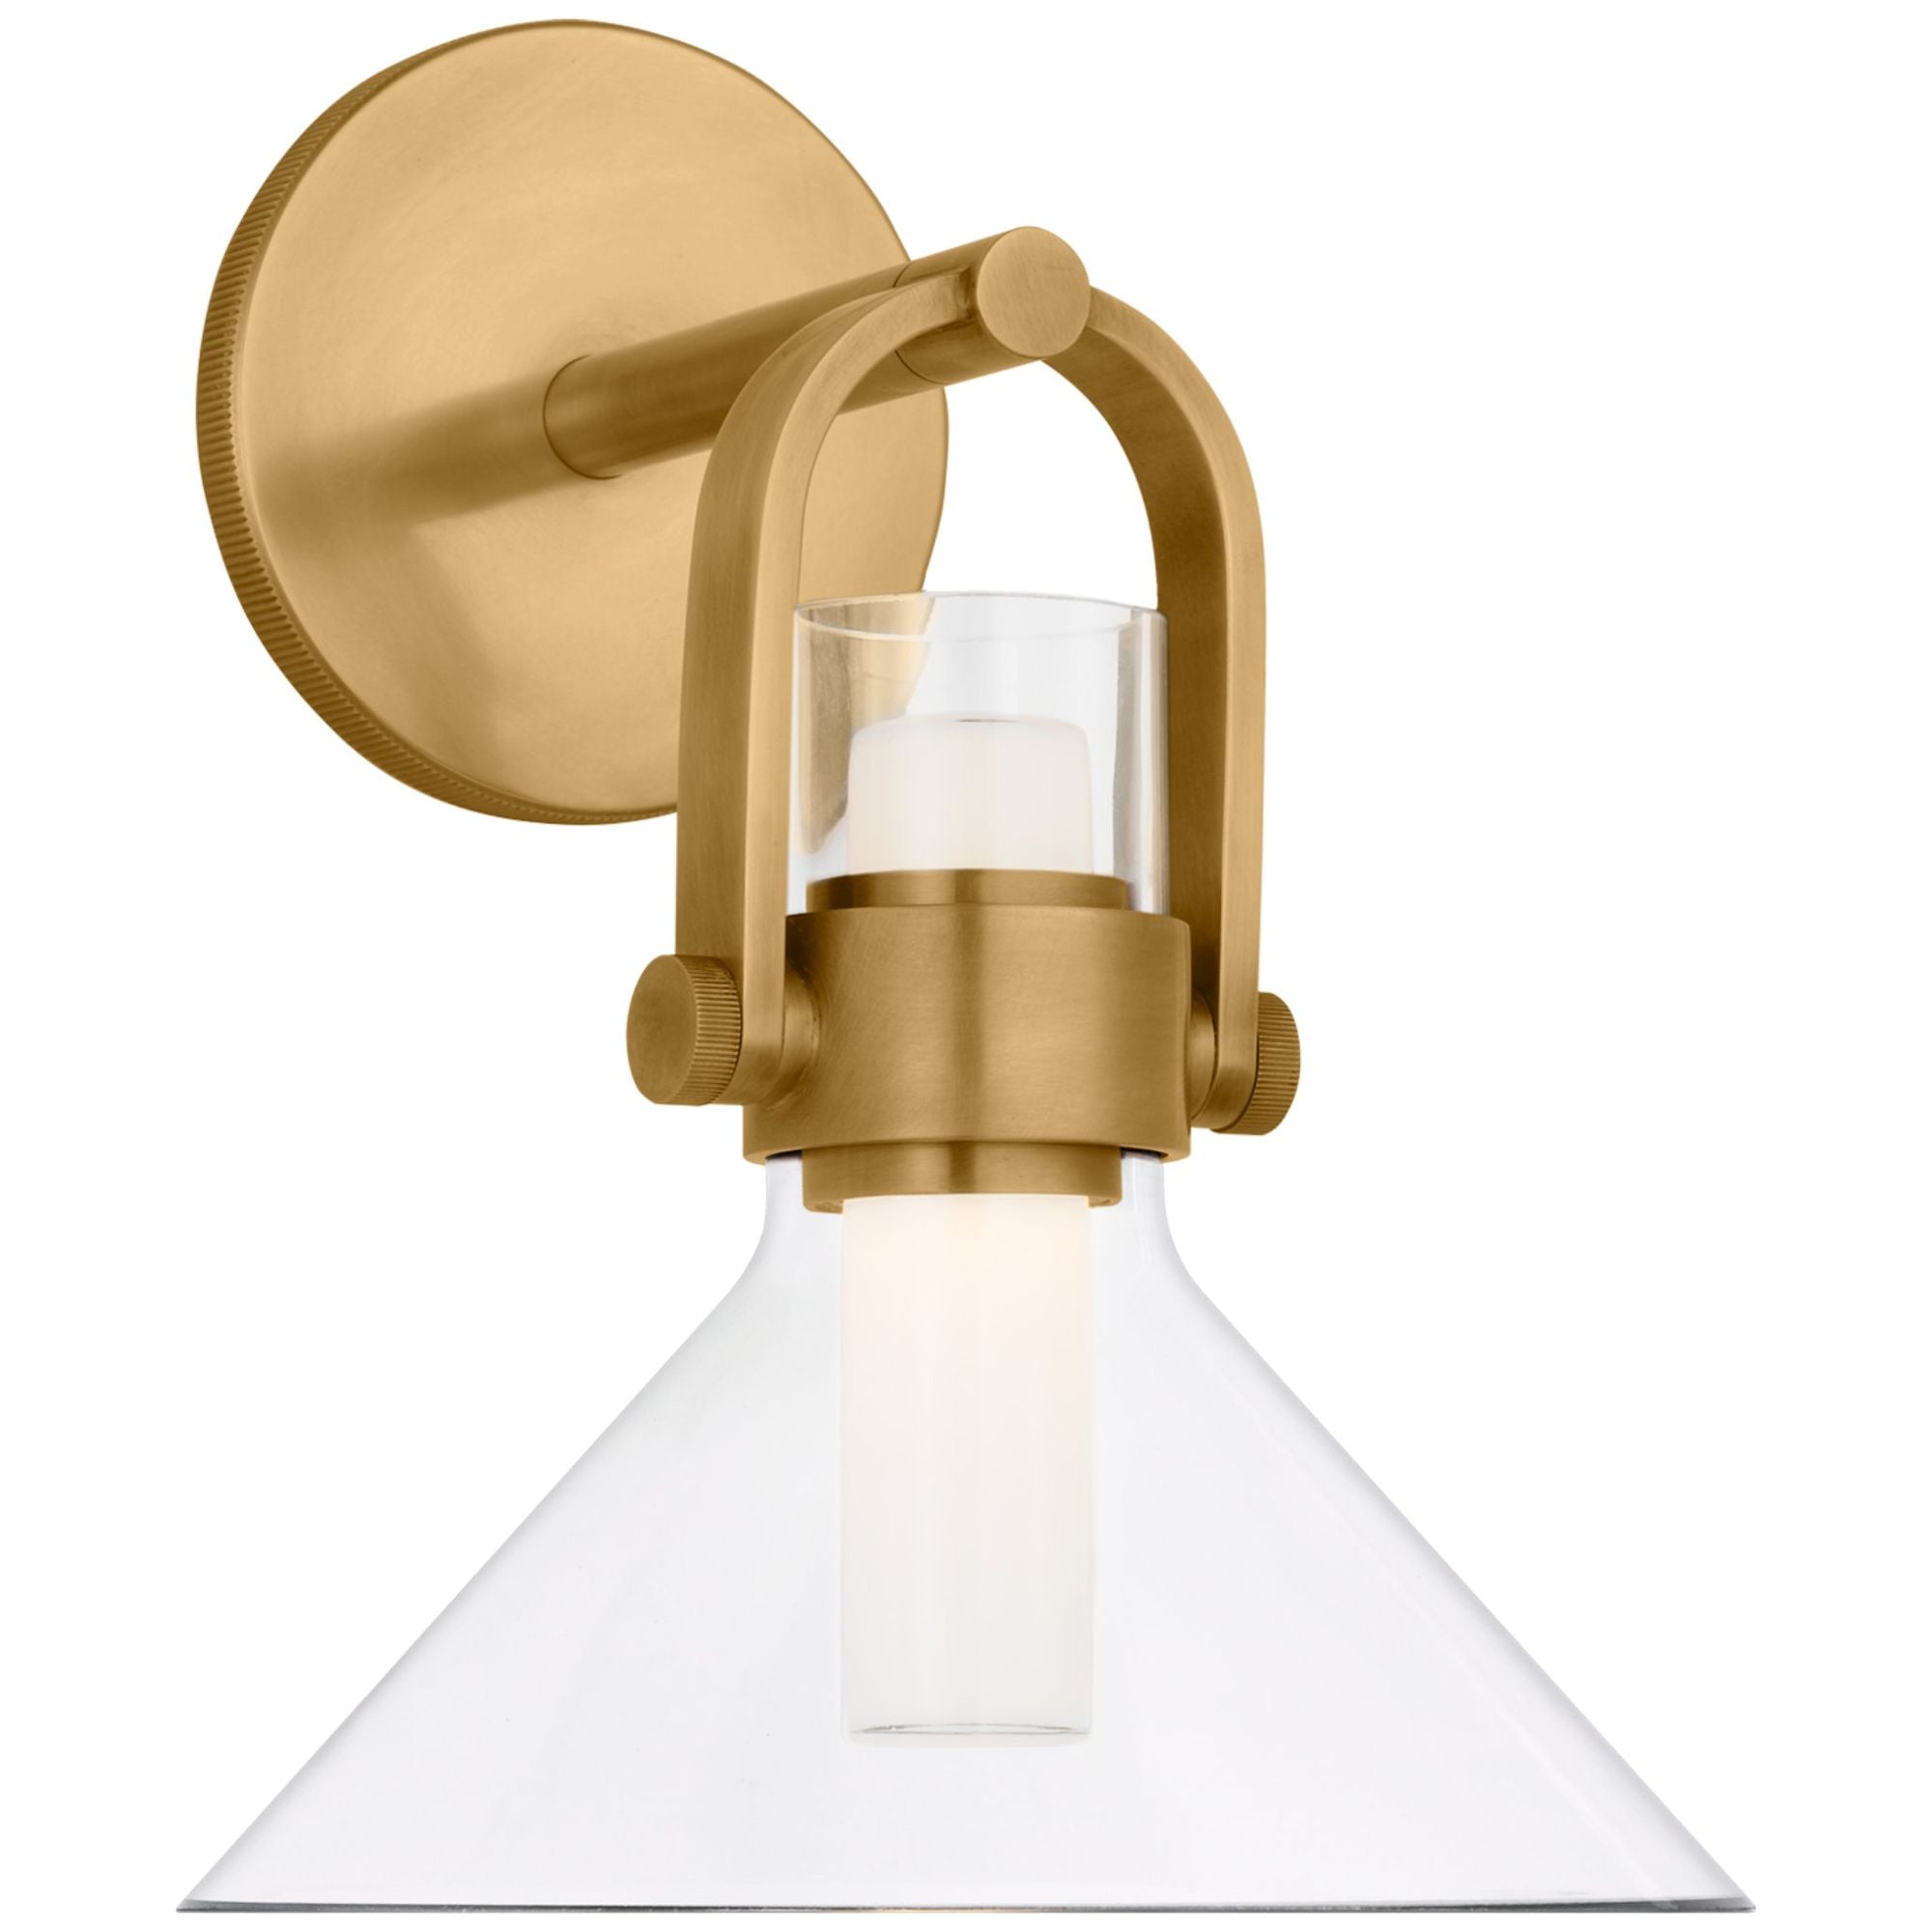 Ian K. Fowler Larkin Small Empire Bracketed Sconce in Hand-Rubbed Antique Brass with Clear Glass